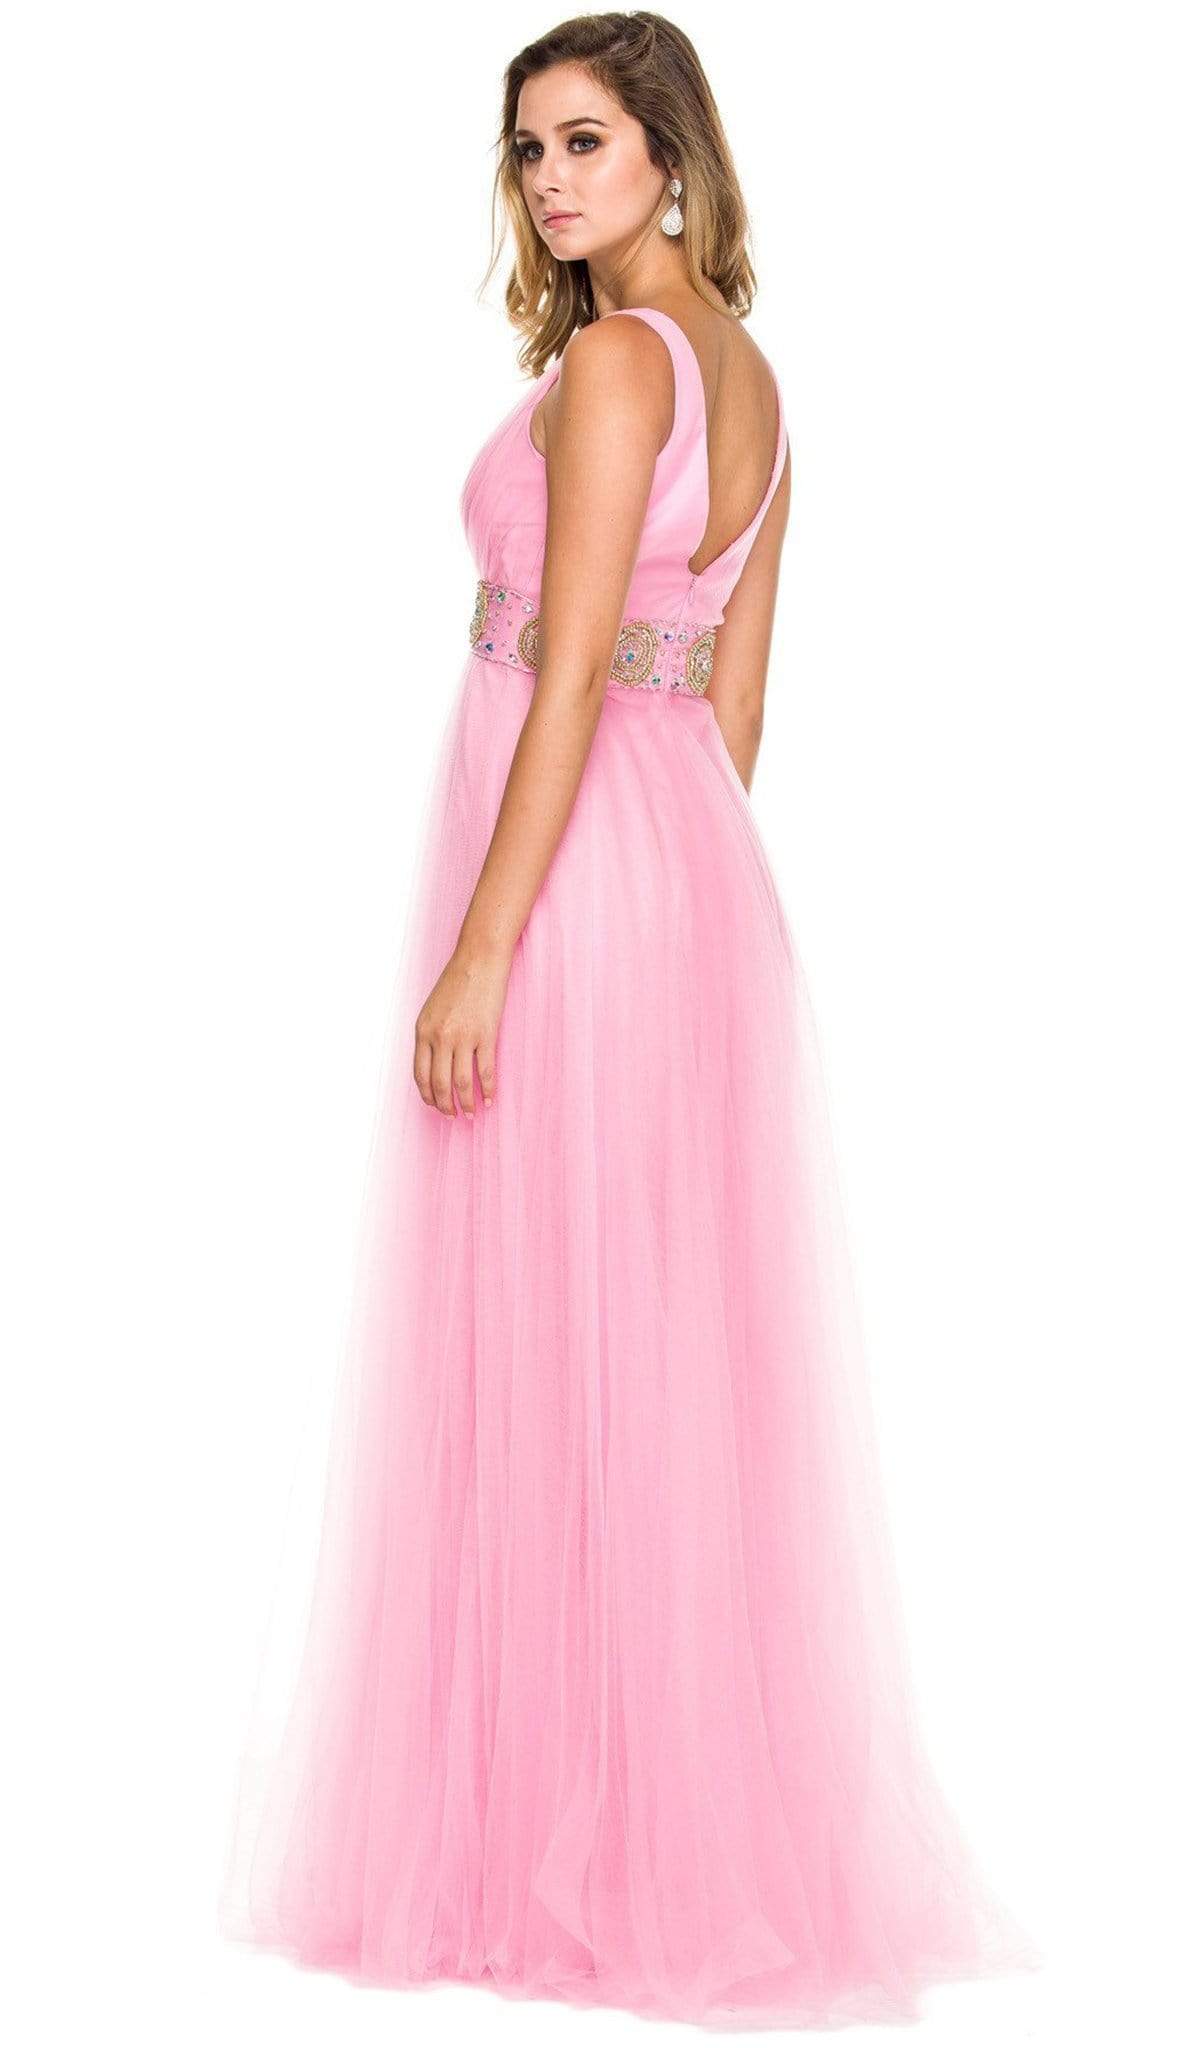 Nox Anabel - 3134 Sleeveless Ruched A-Line Long Gown Special Occasion Dress